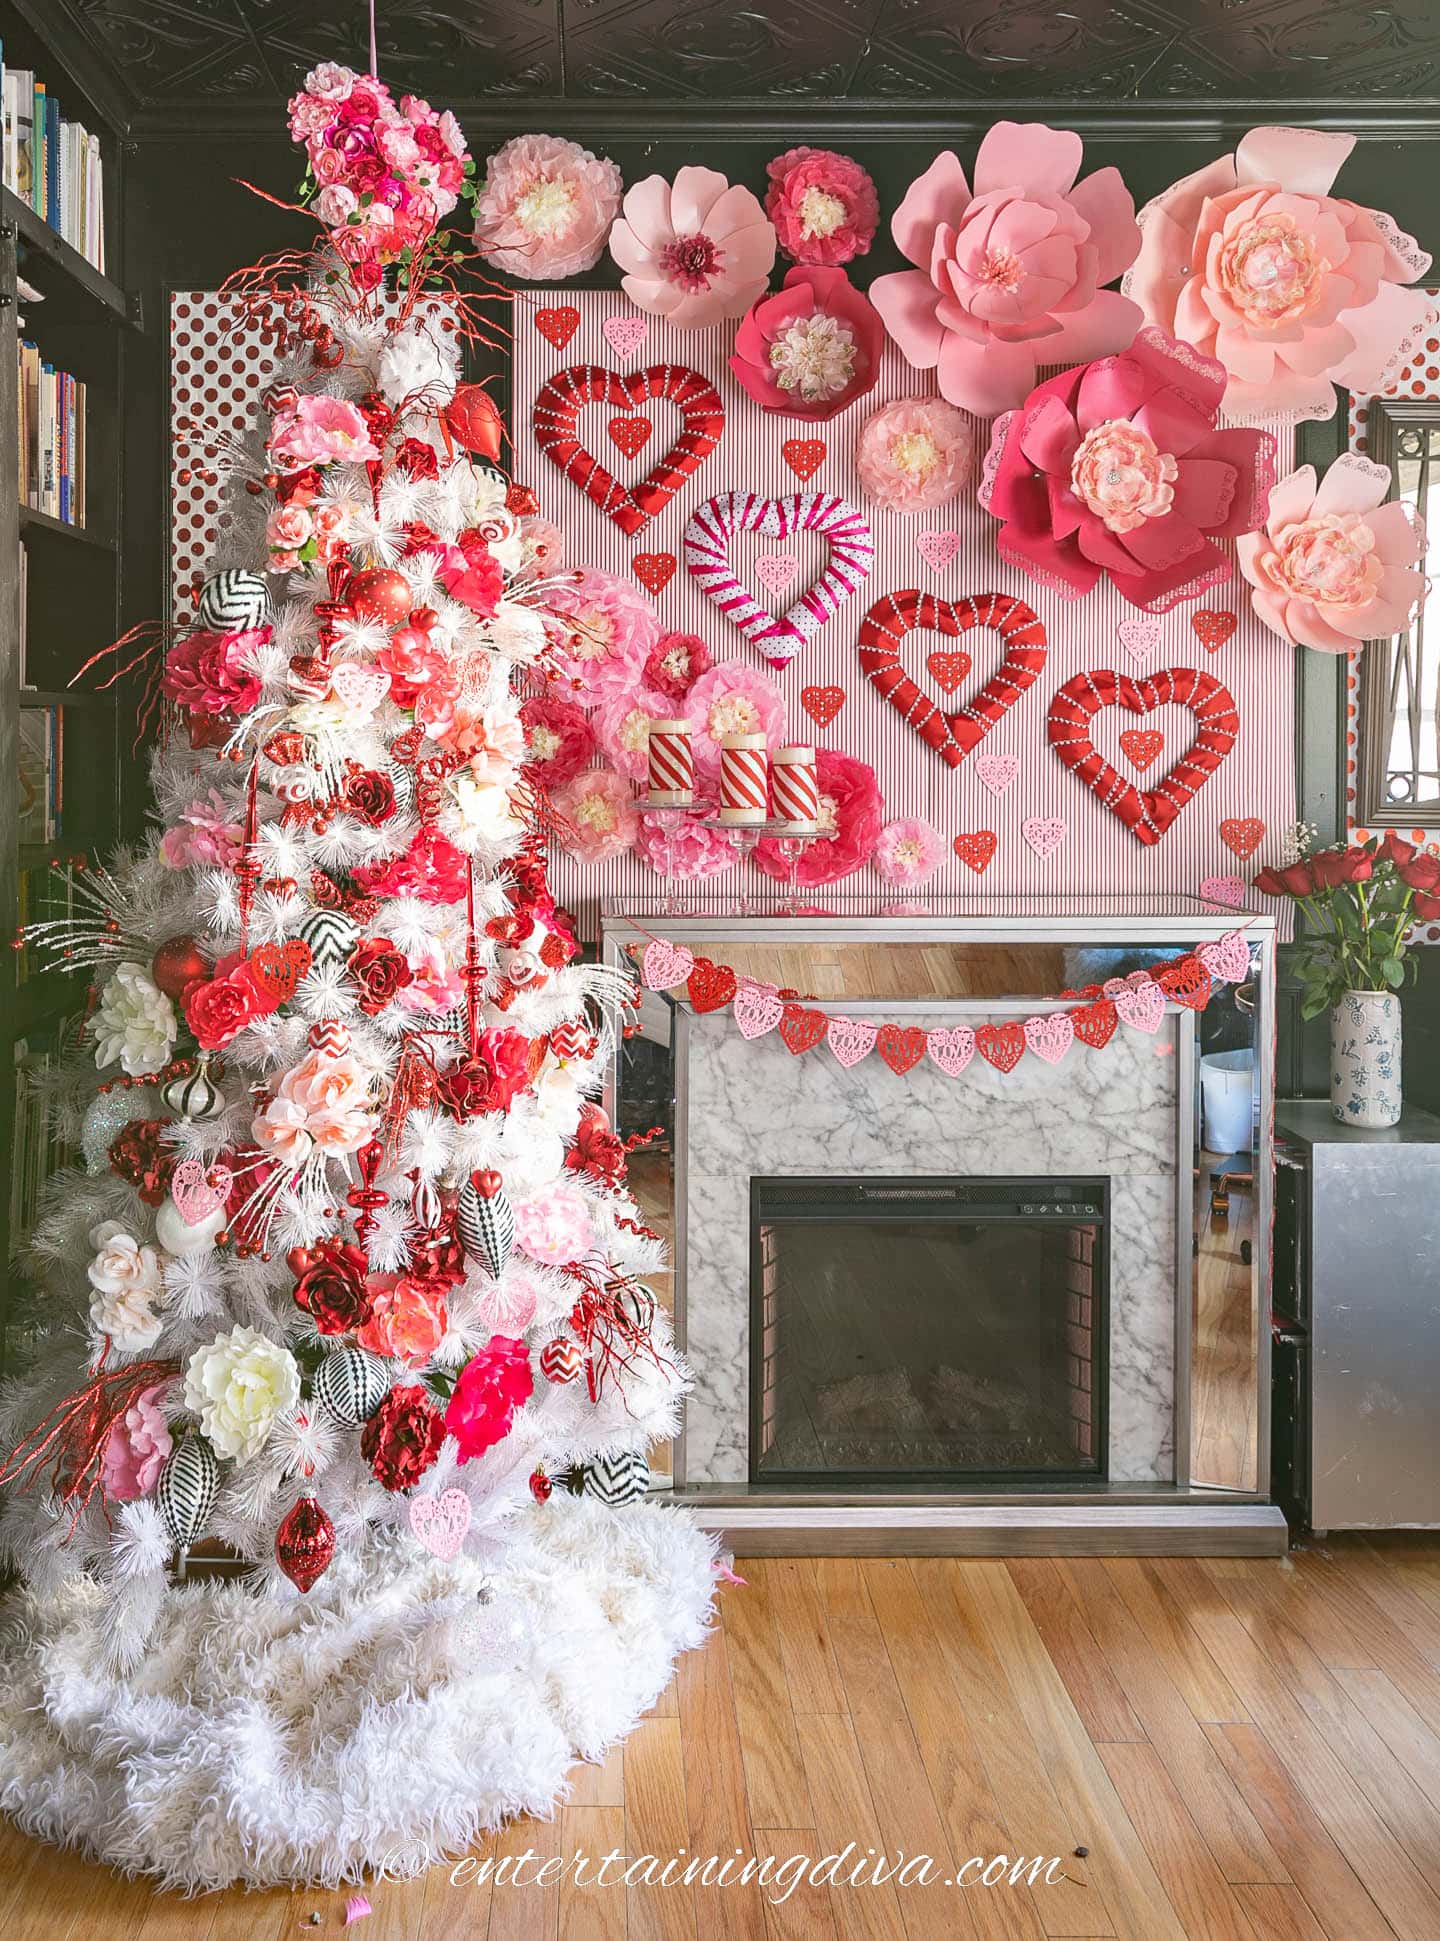 Easy DIY Valentine Heart Wreath (Made With Ribbon)